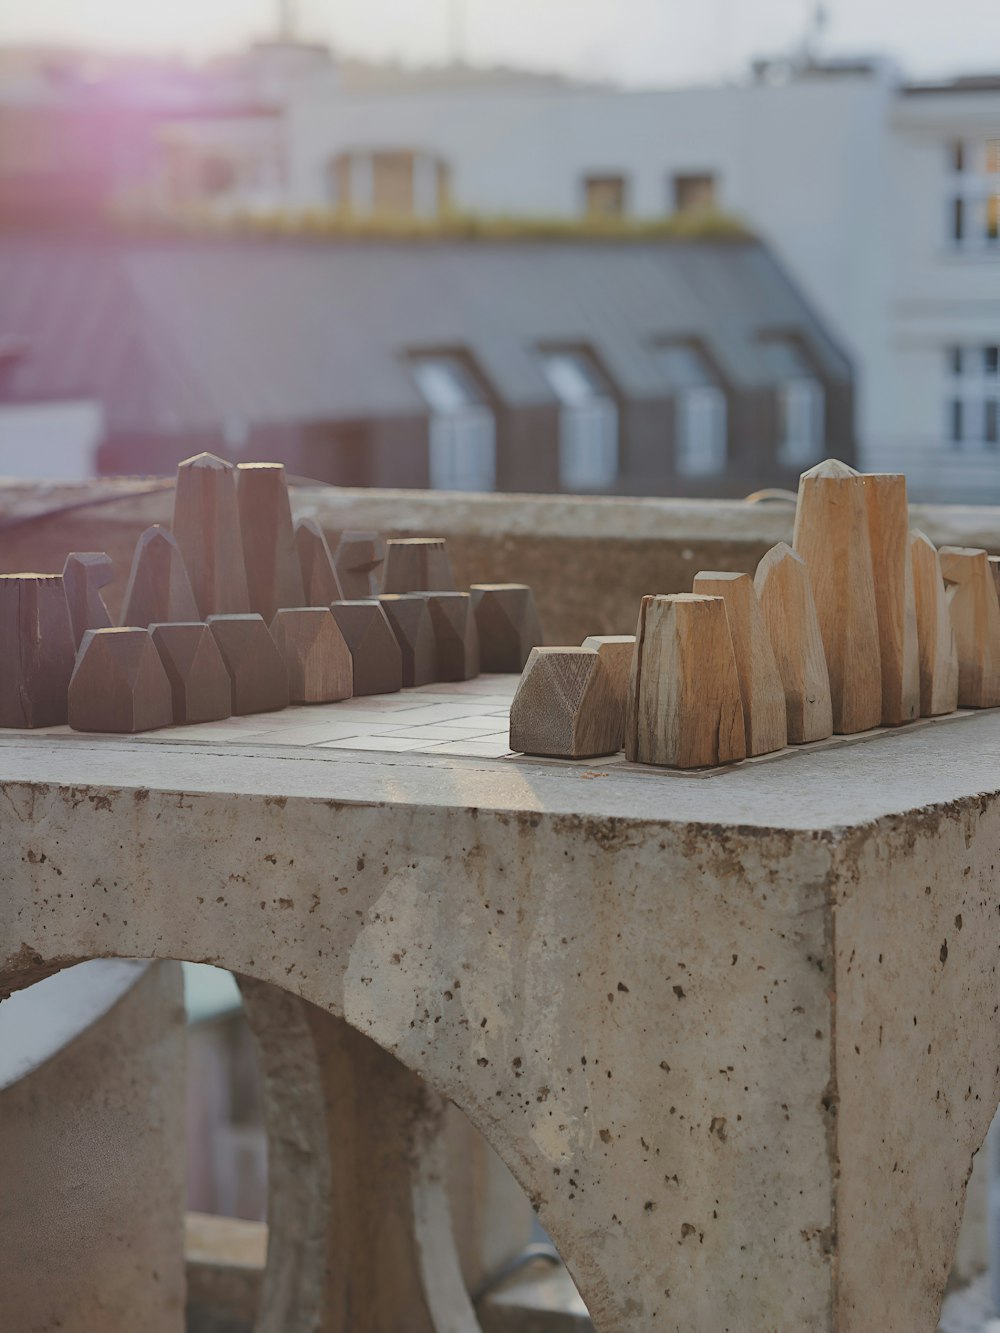 a cement bench with wooden blocks on top of it